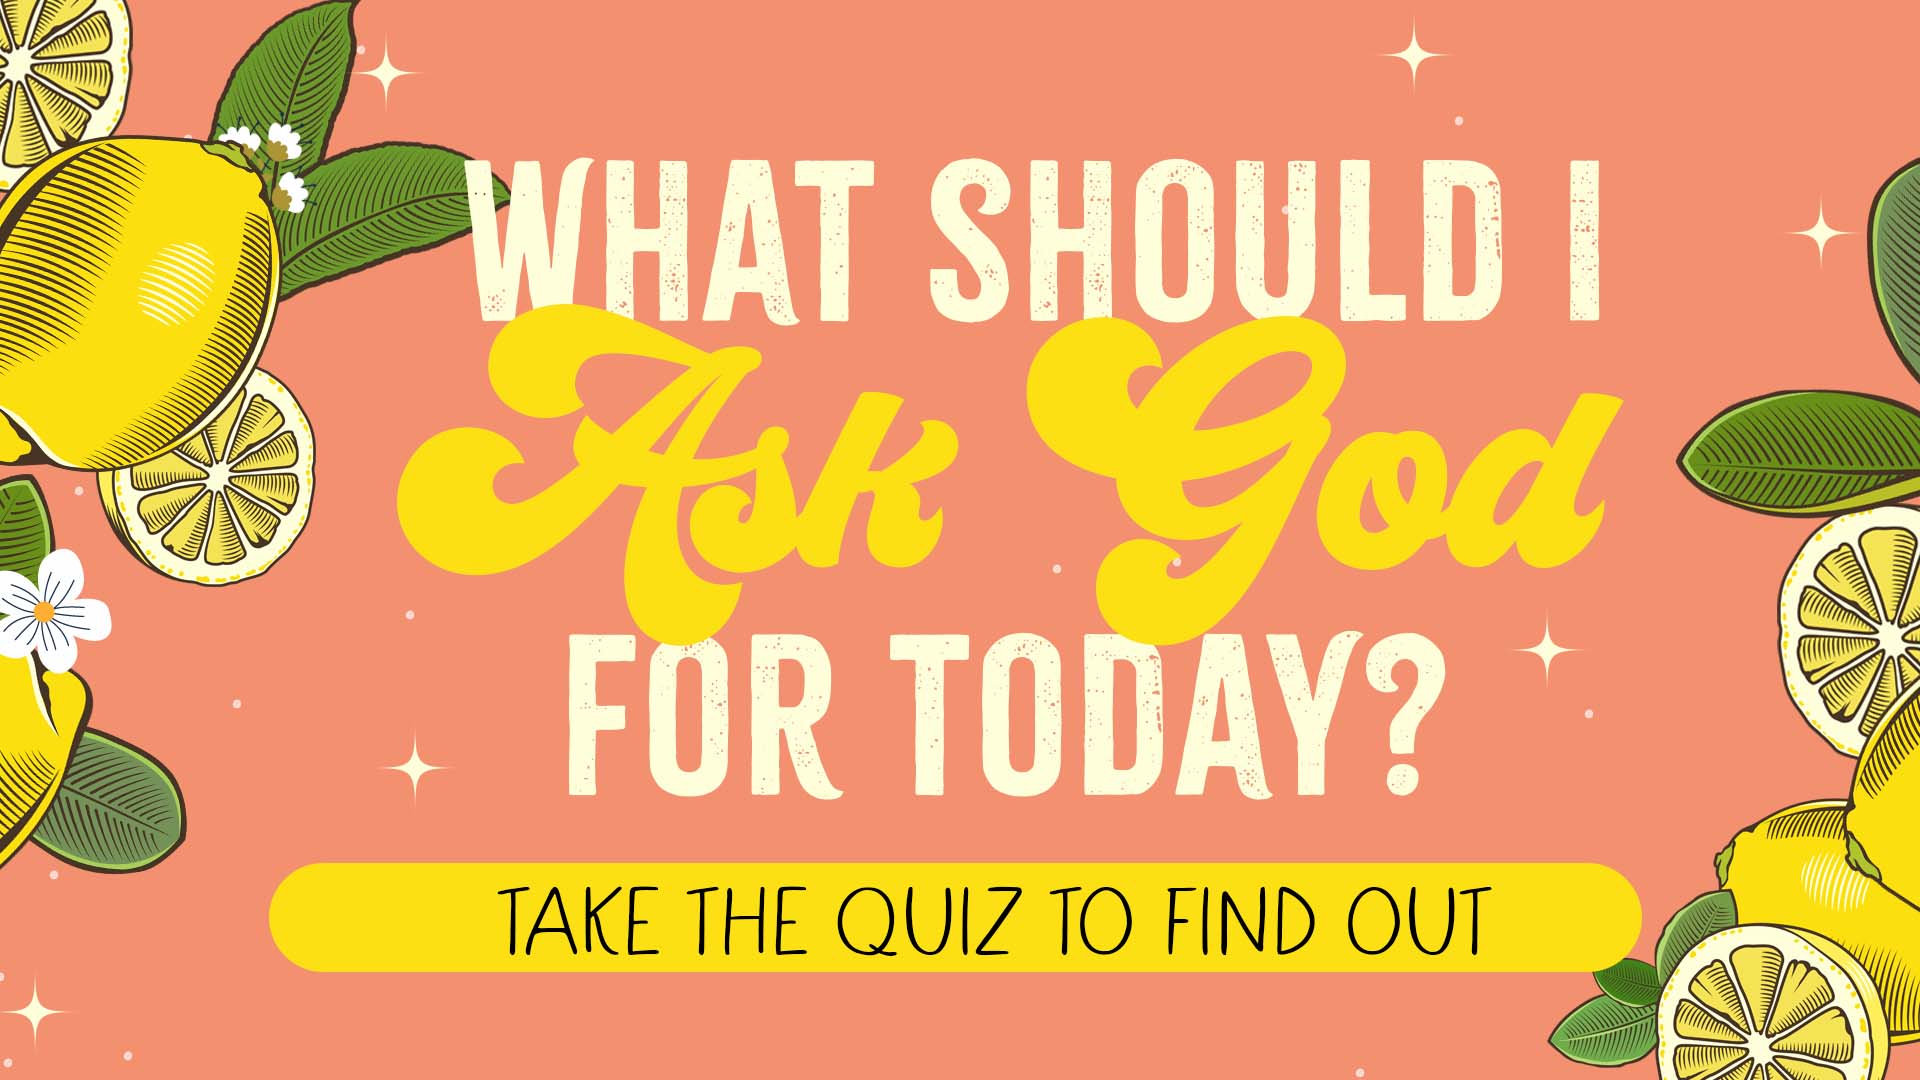 What Should I Ask God for Today? Take the quiz to find out.